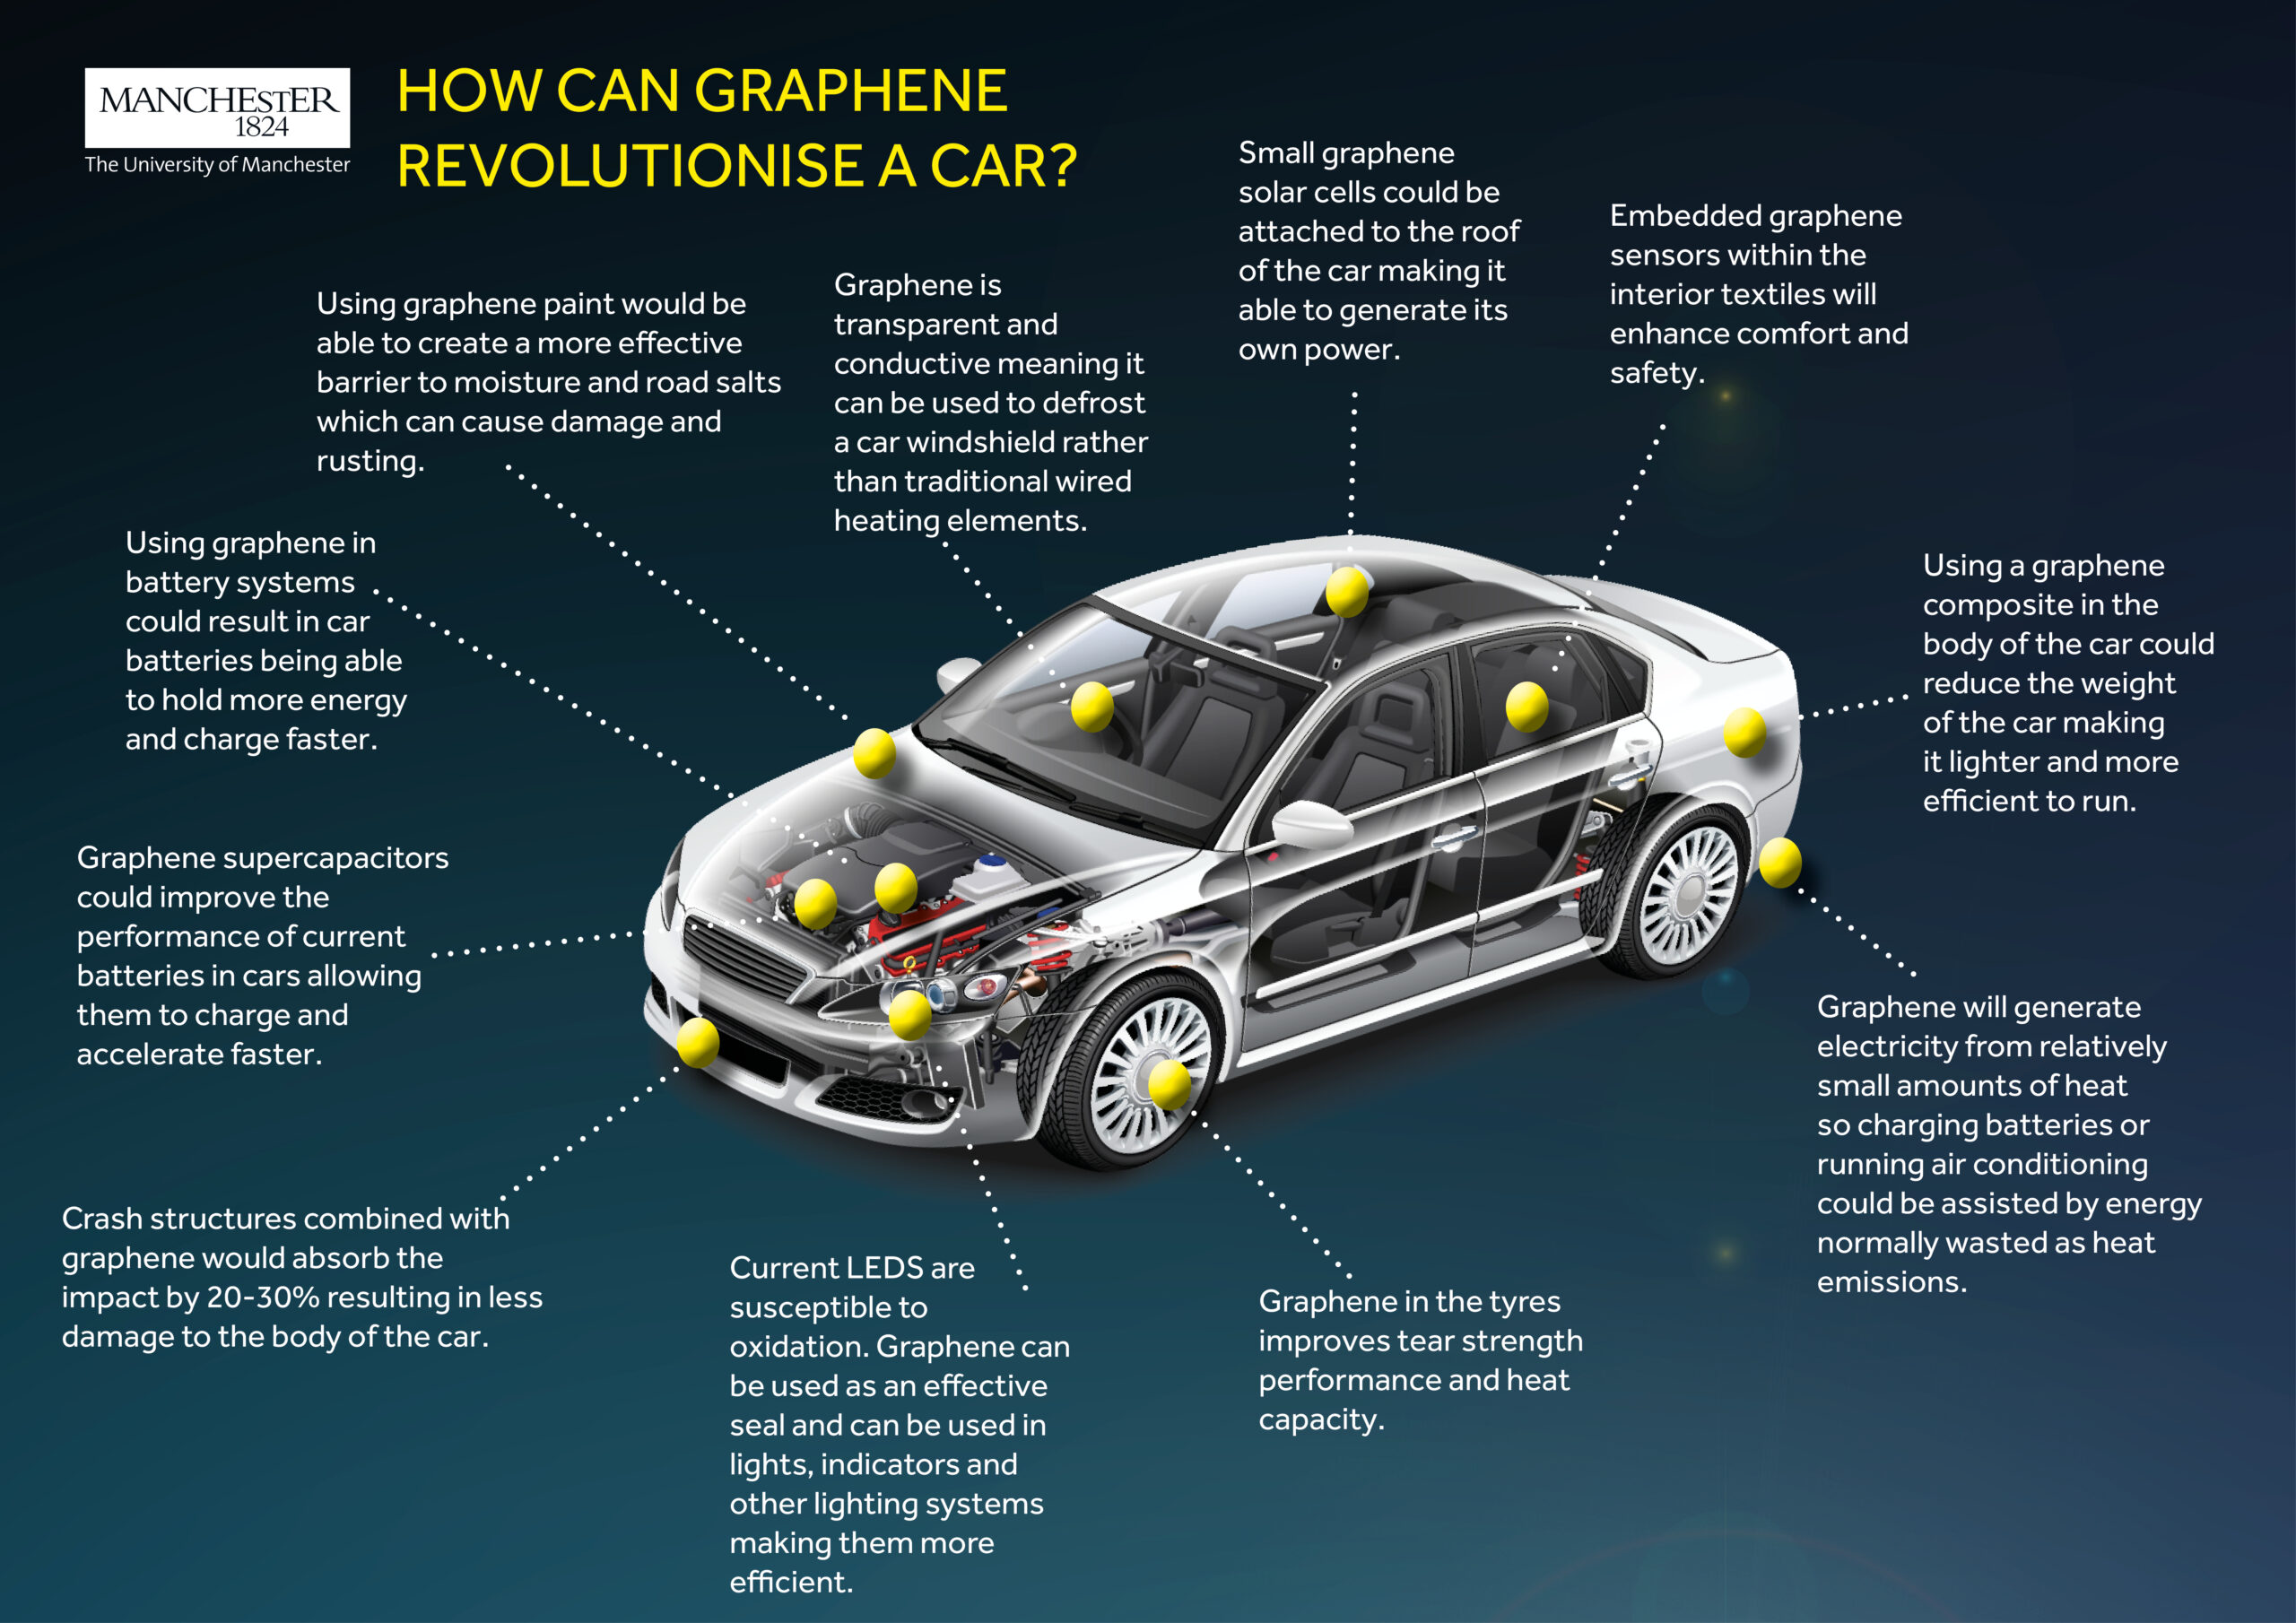 Carbon Fiber In Cars: What Is It And How Does It Differ From Graphene?